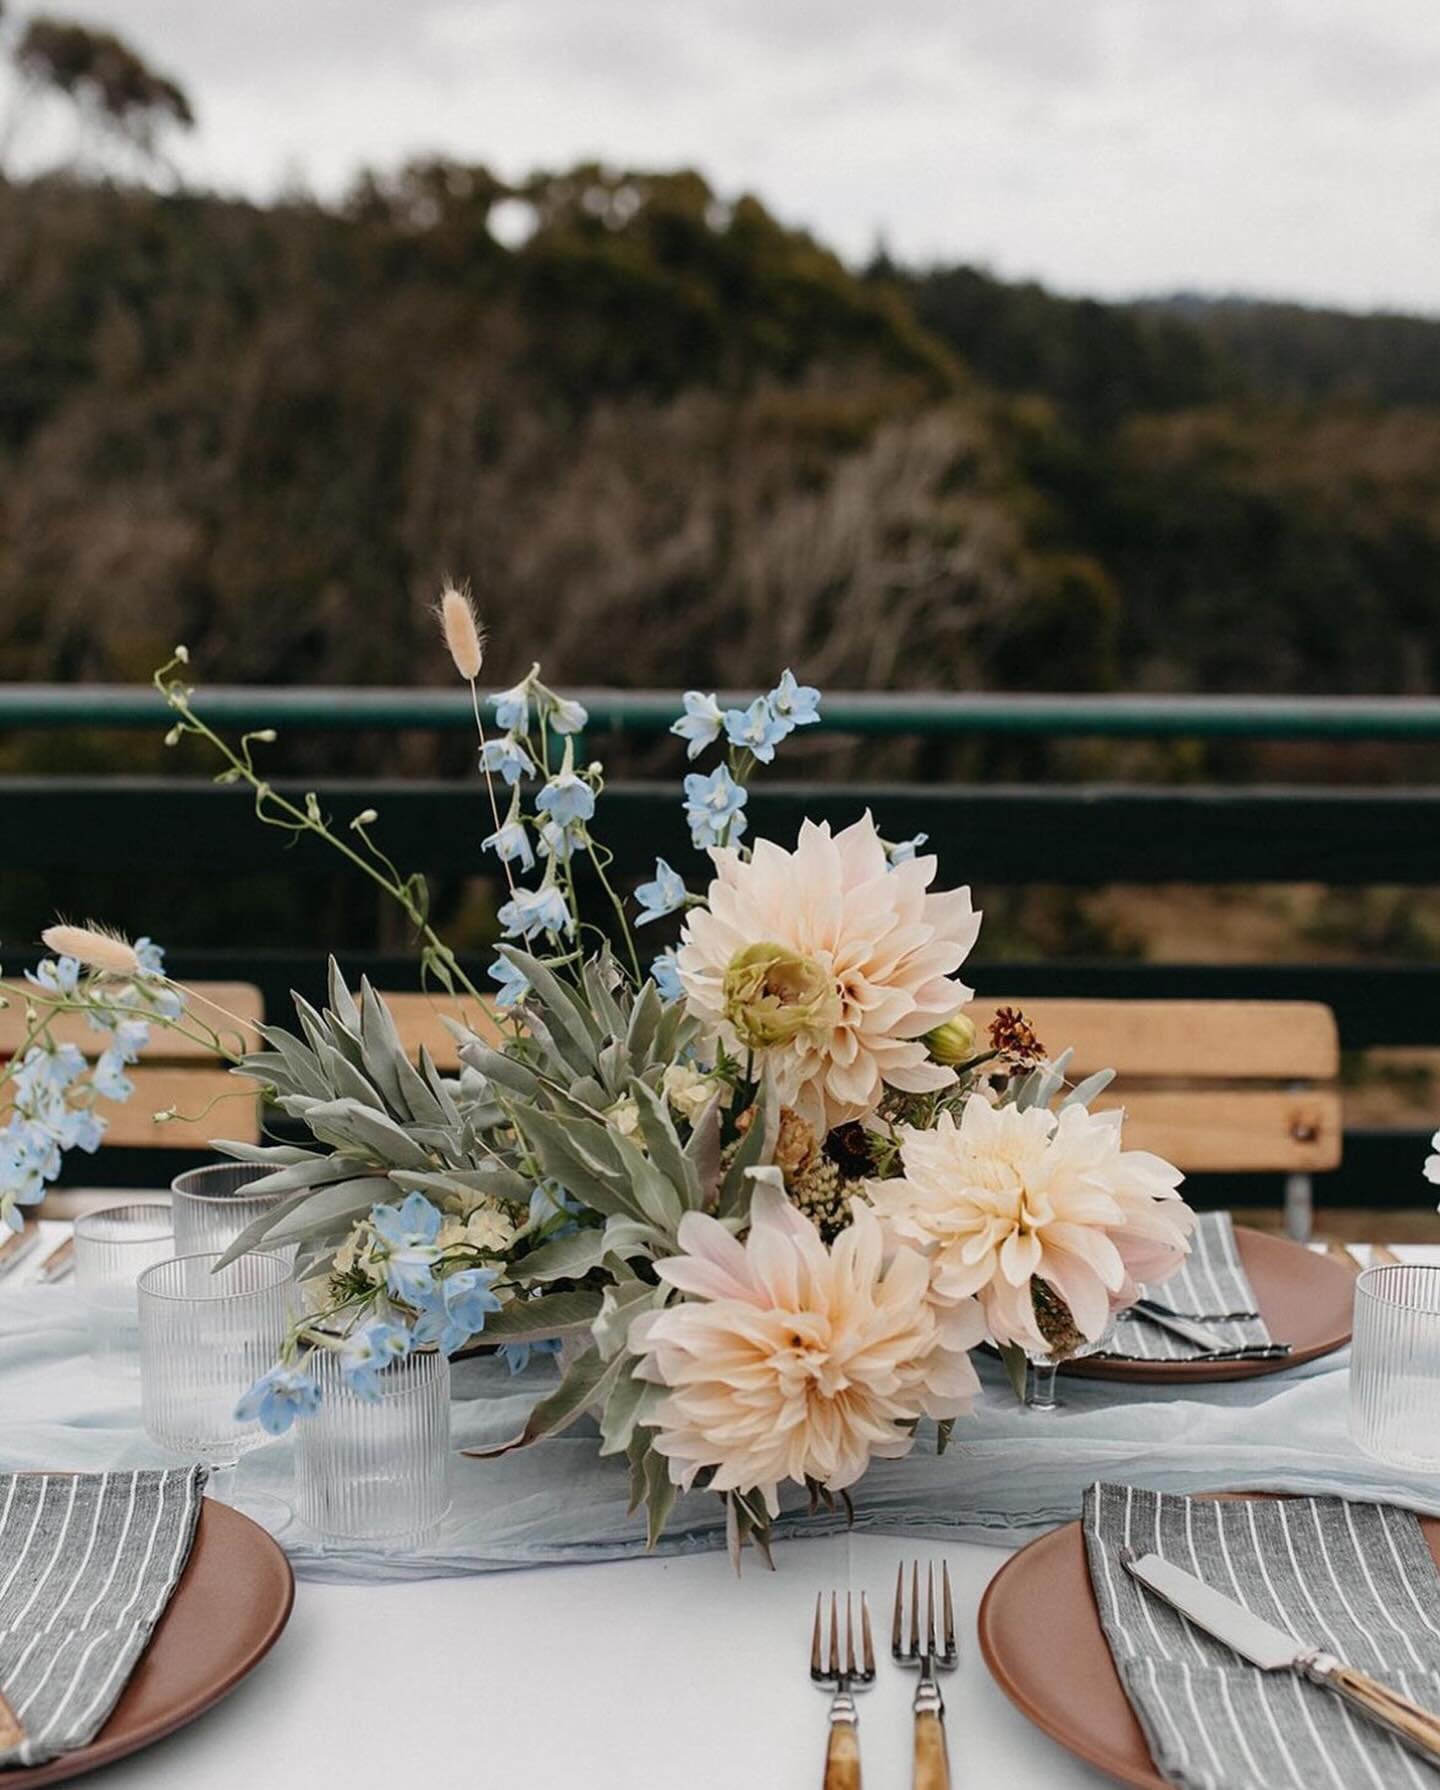 { WILDBRIDE FLORALS } Pastel pink and blue blooms transform the coastal @TimberCoveResort into a late summer paradise, thanks to @MarigoldSF! 
⠀⠀⠀⠀⠀⠀⠀⠀⠀
Photography // @alixann_loosle_photography 
Florals // @Marigold_sf
Venue // @timbercoveresort 
#